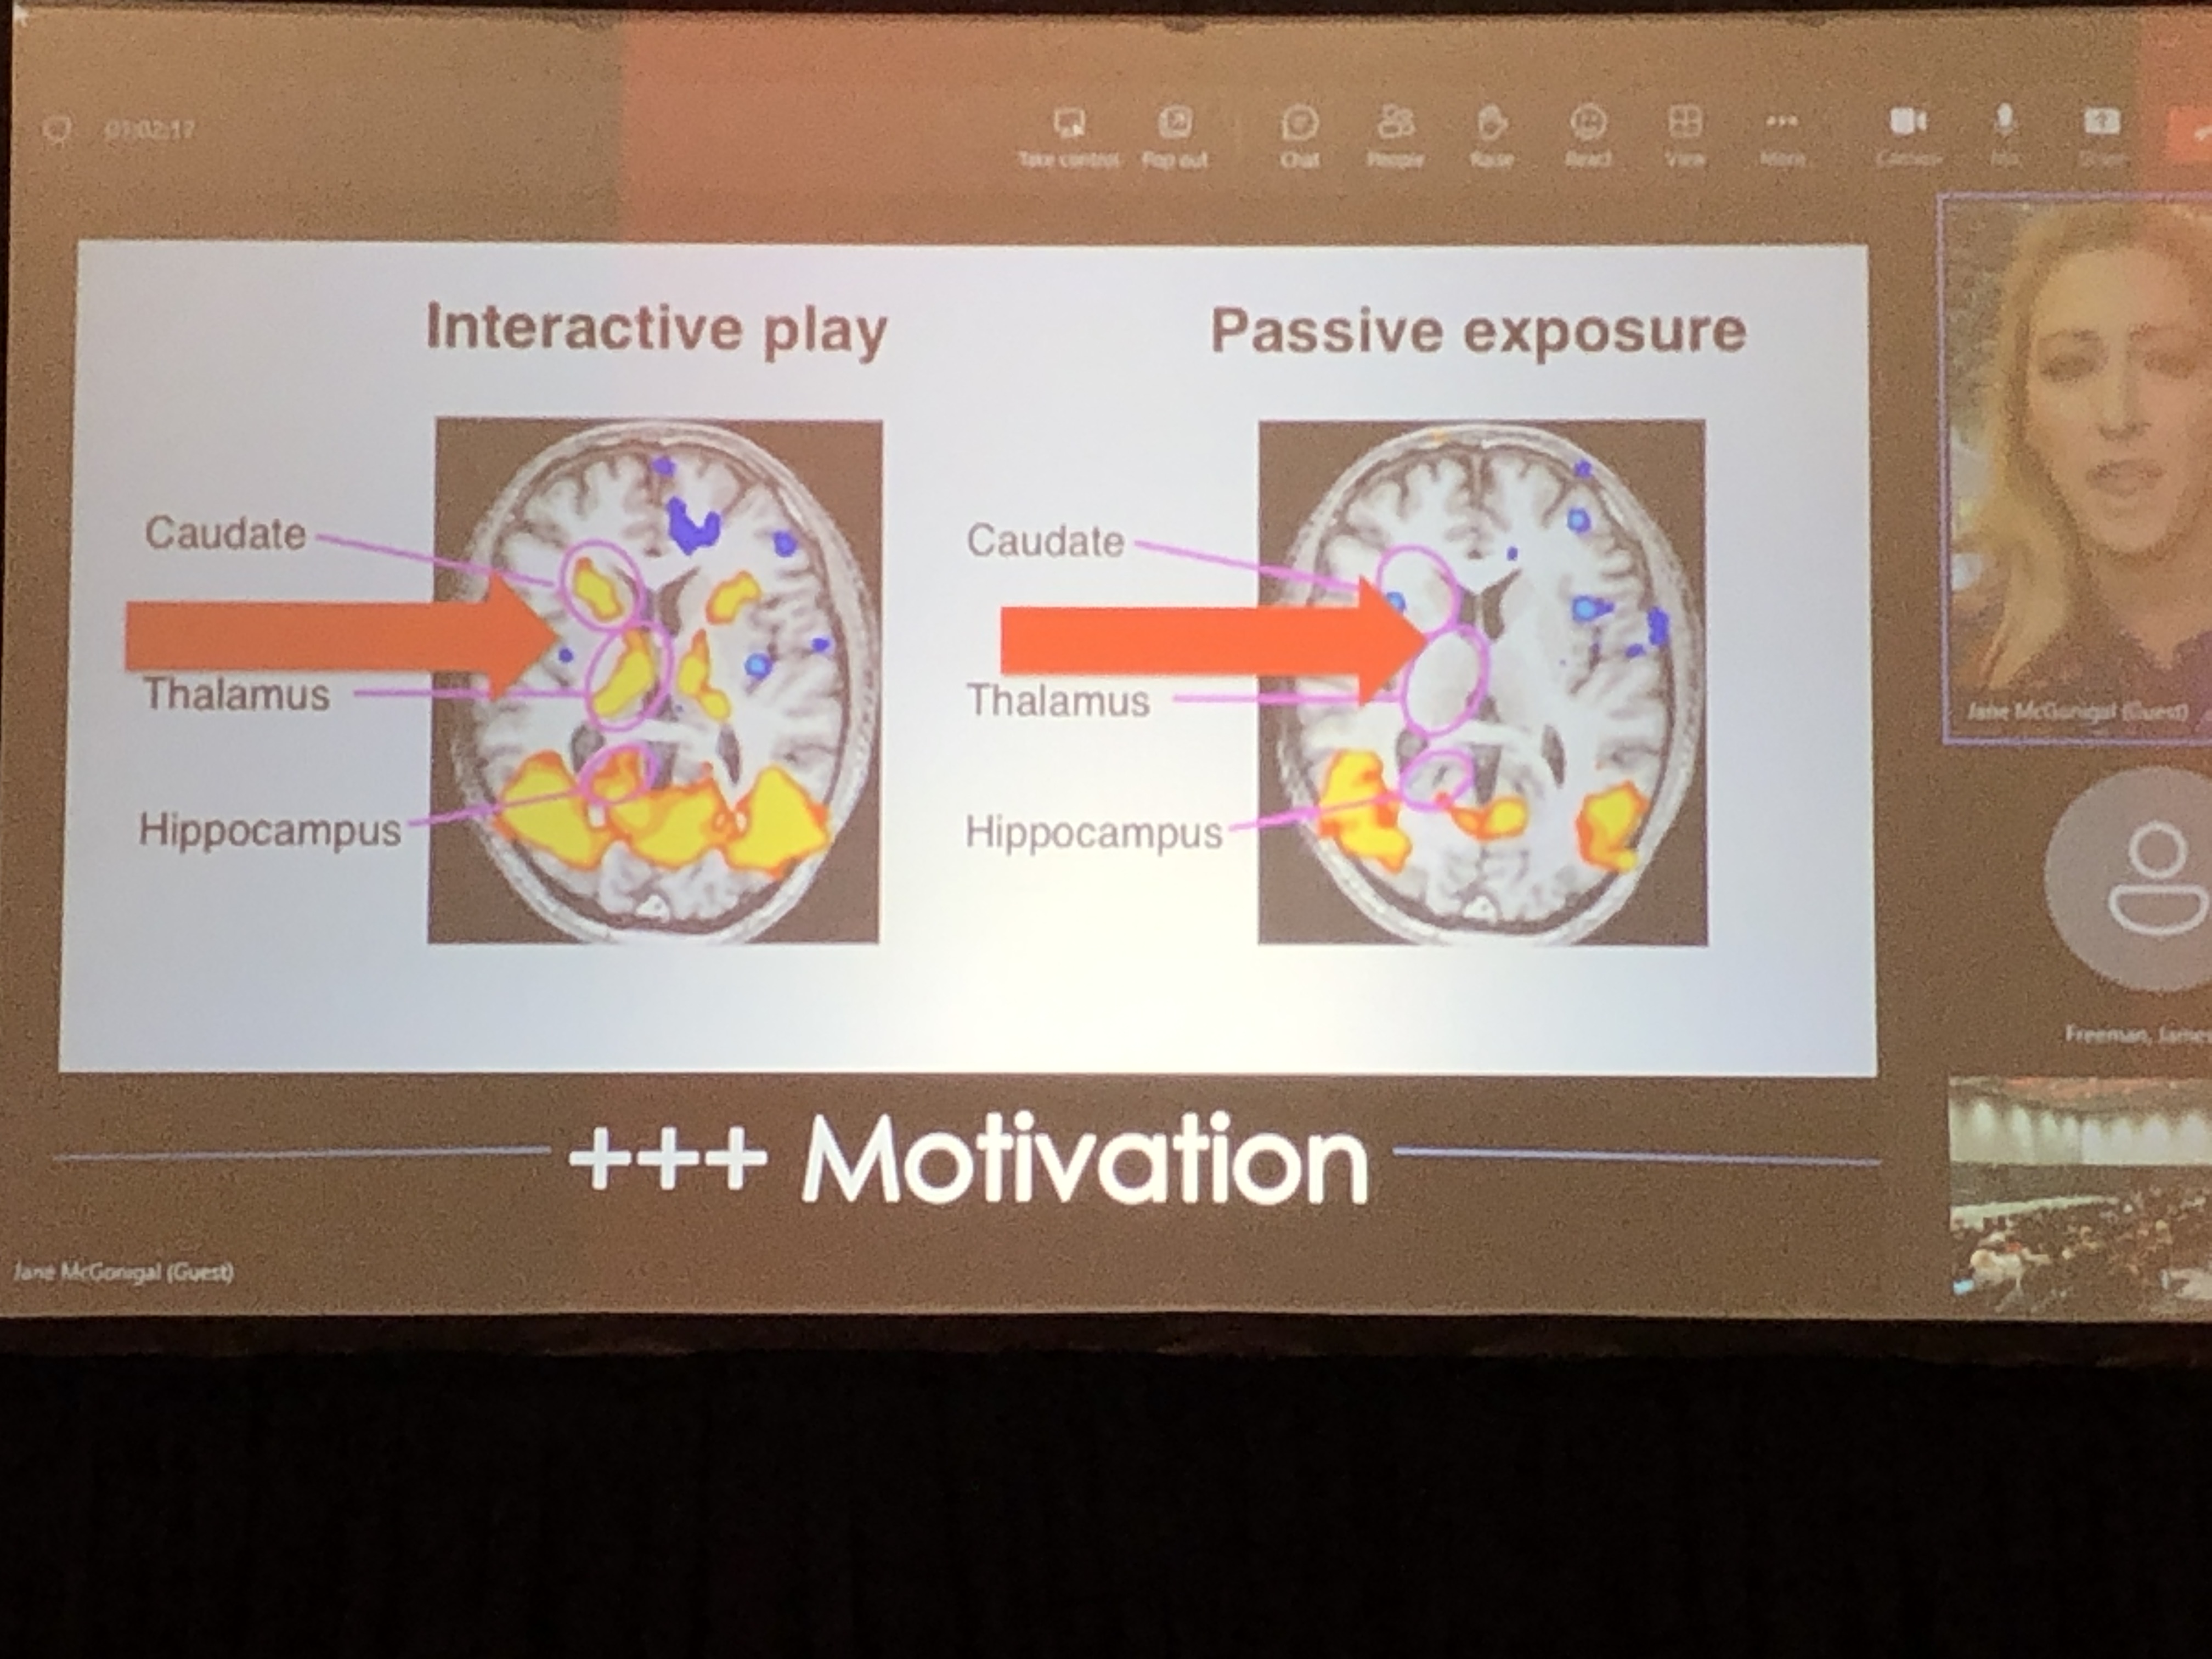 Slide from Dr. Jane McGonigal's presentation, showing increased brain activity with active participation over passively receiving content.